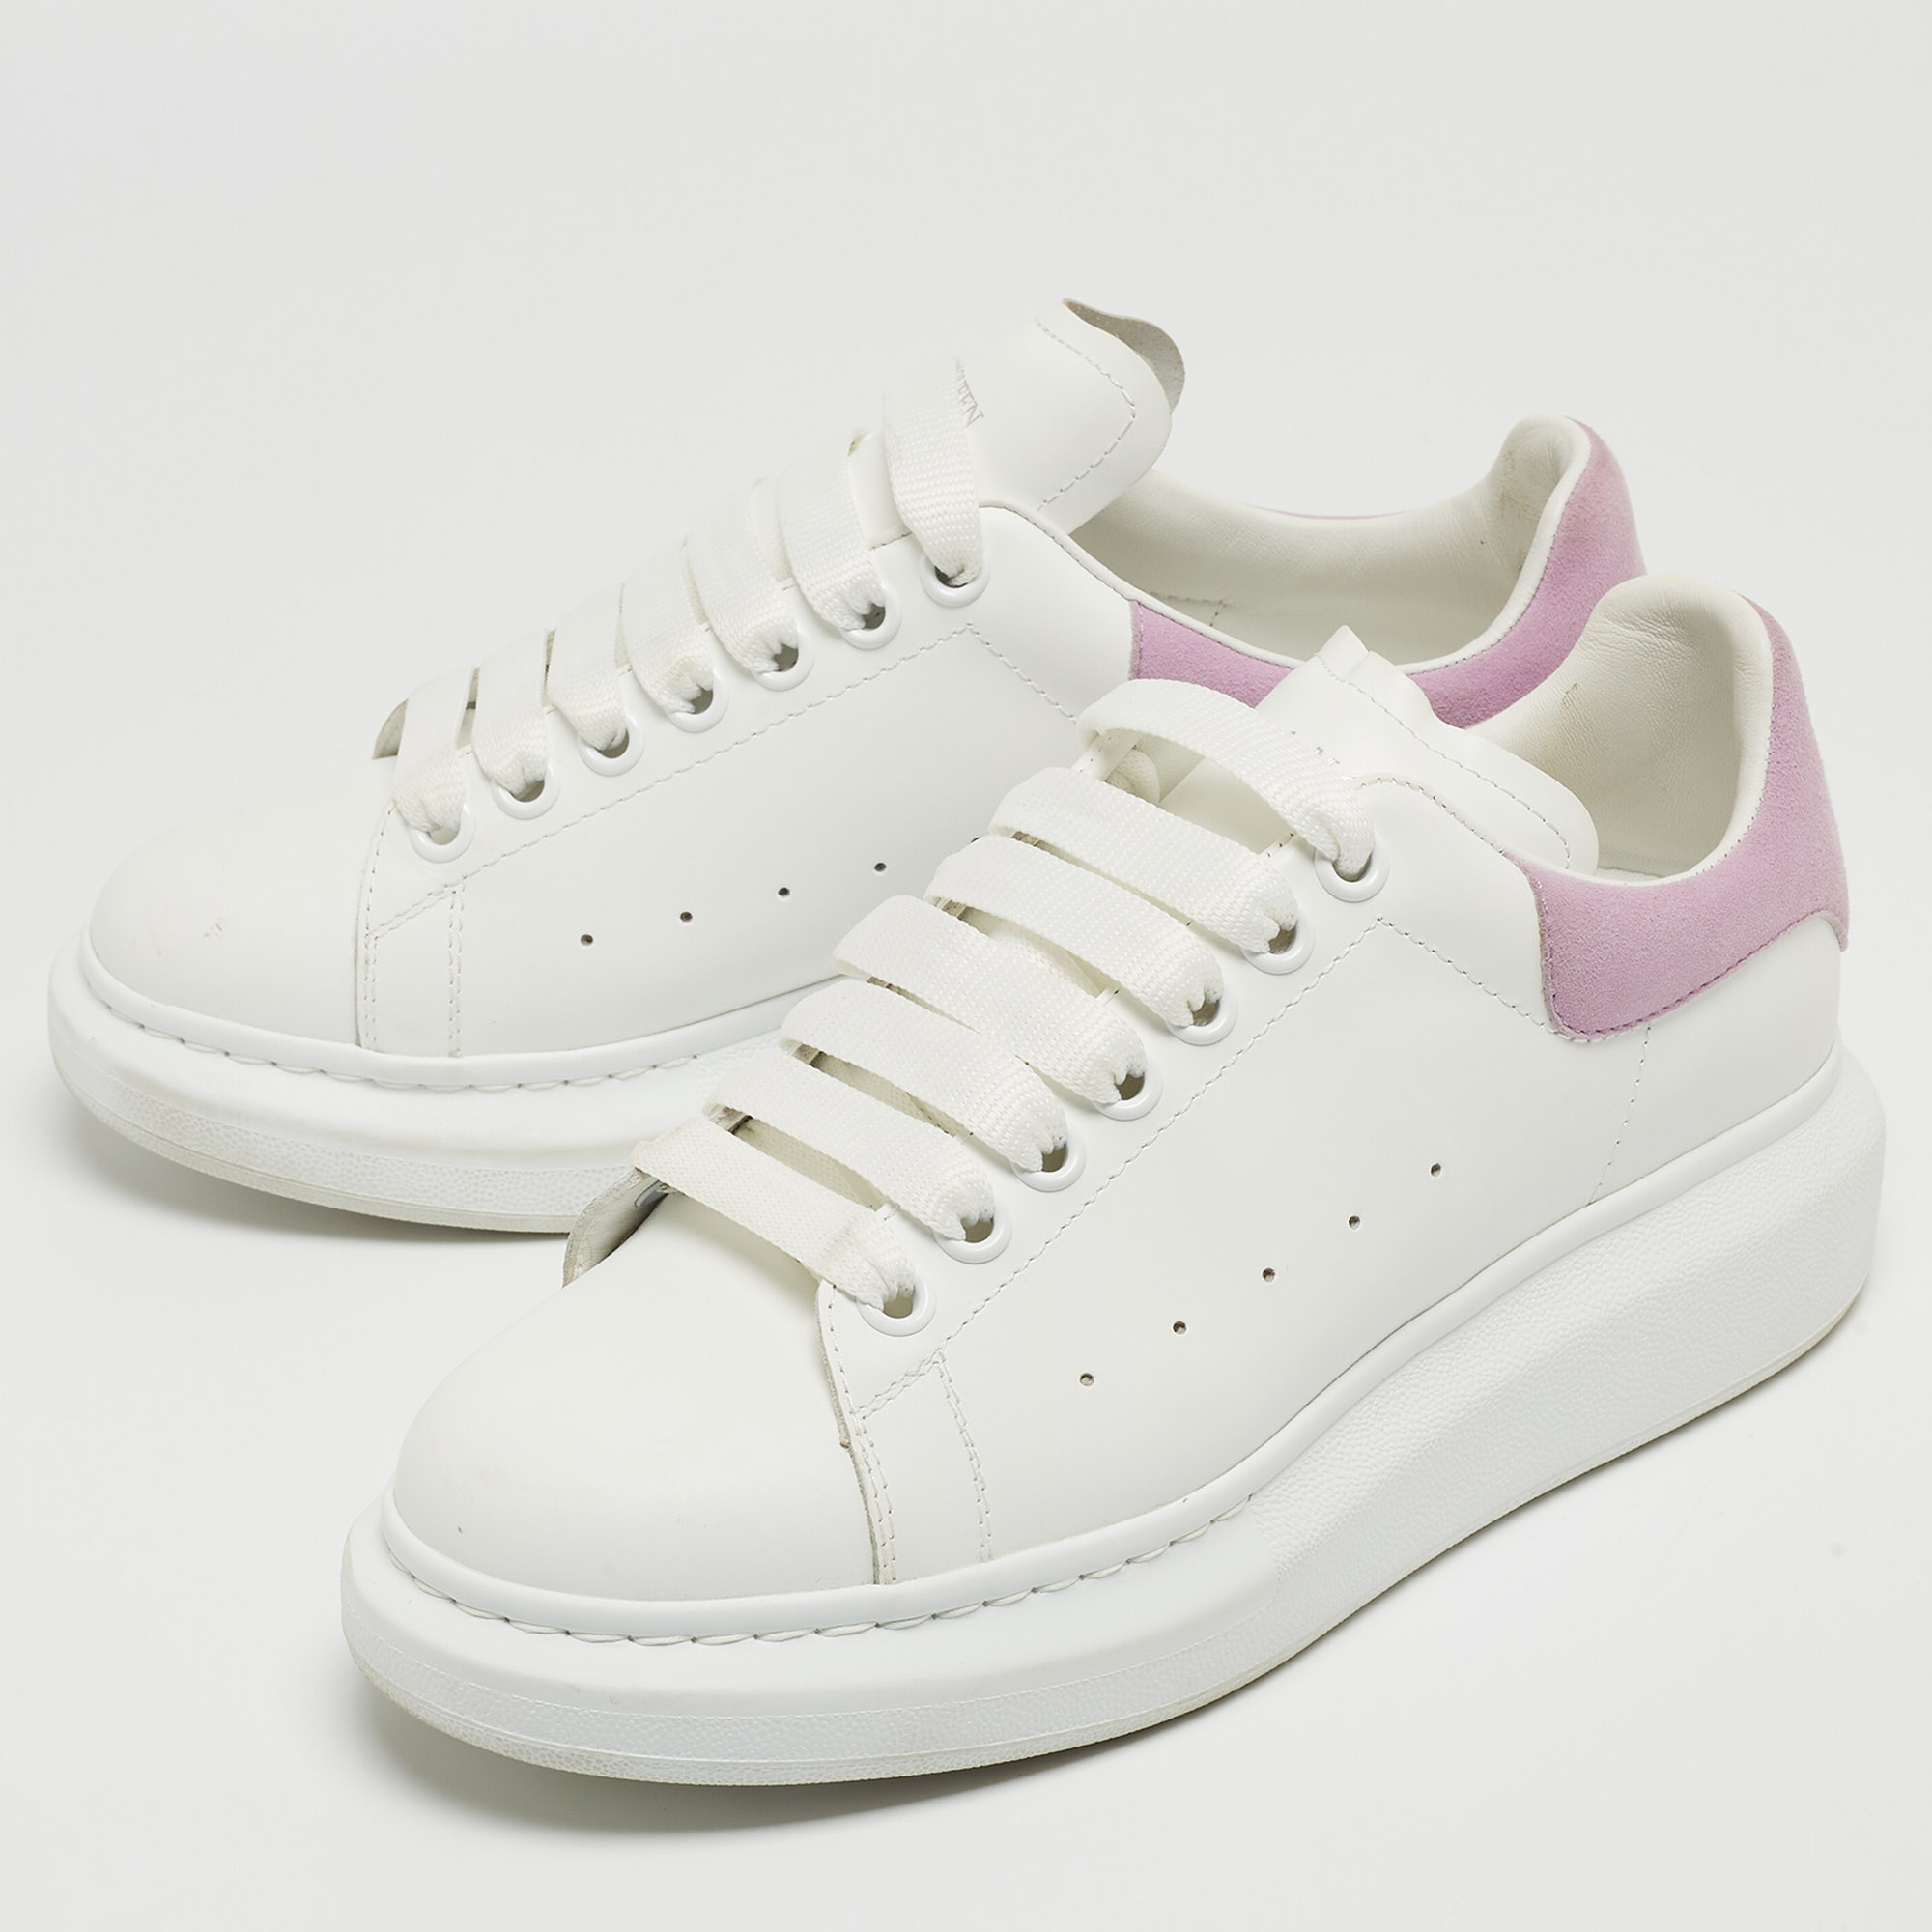 

Alexander McQueen White/Purples Suede and Leather Oversized Sneakers Size